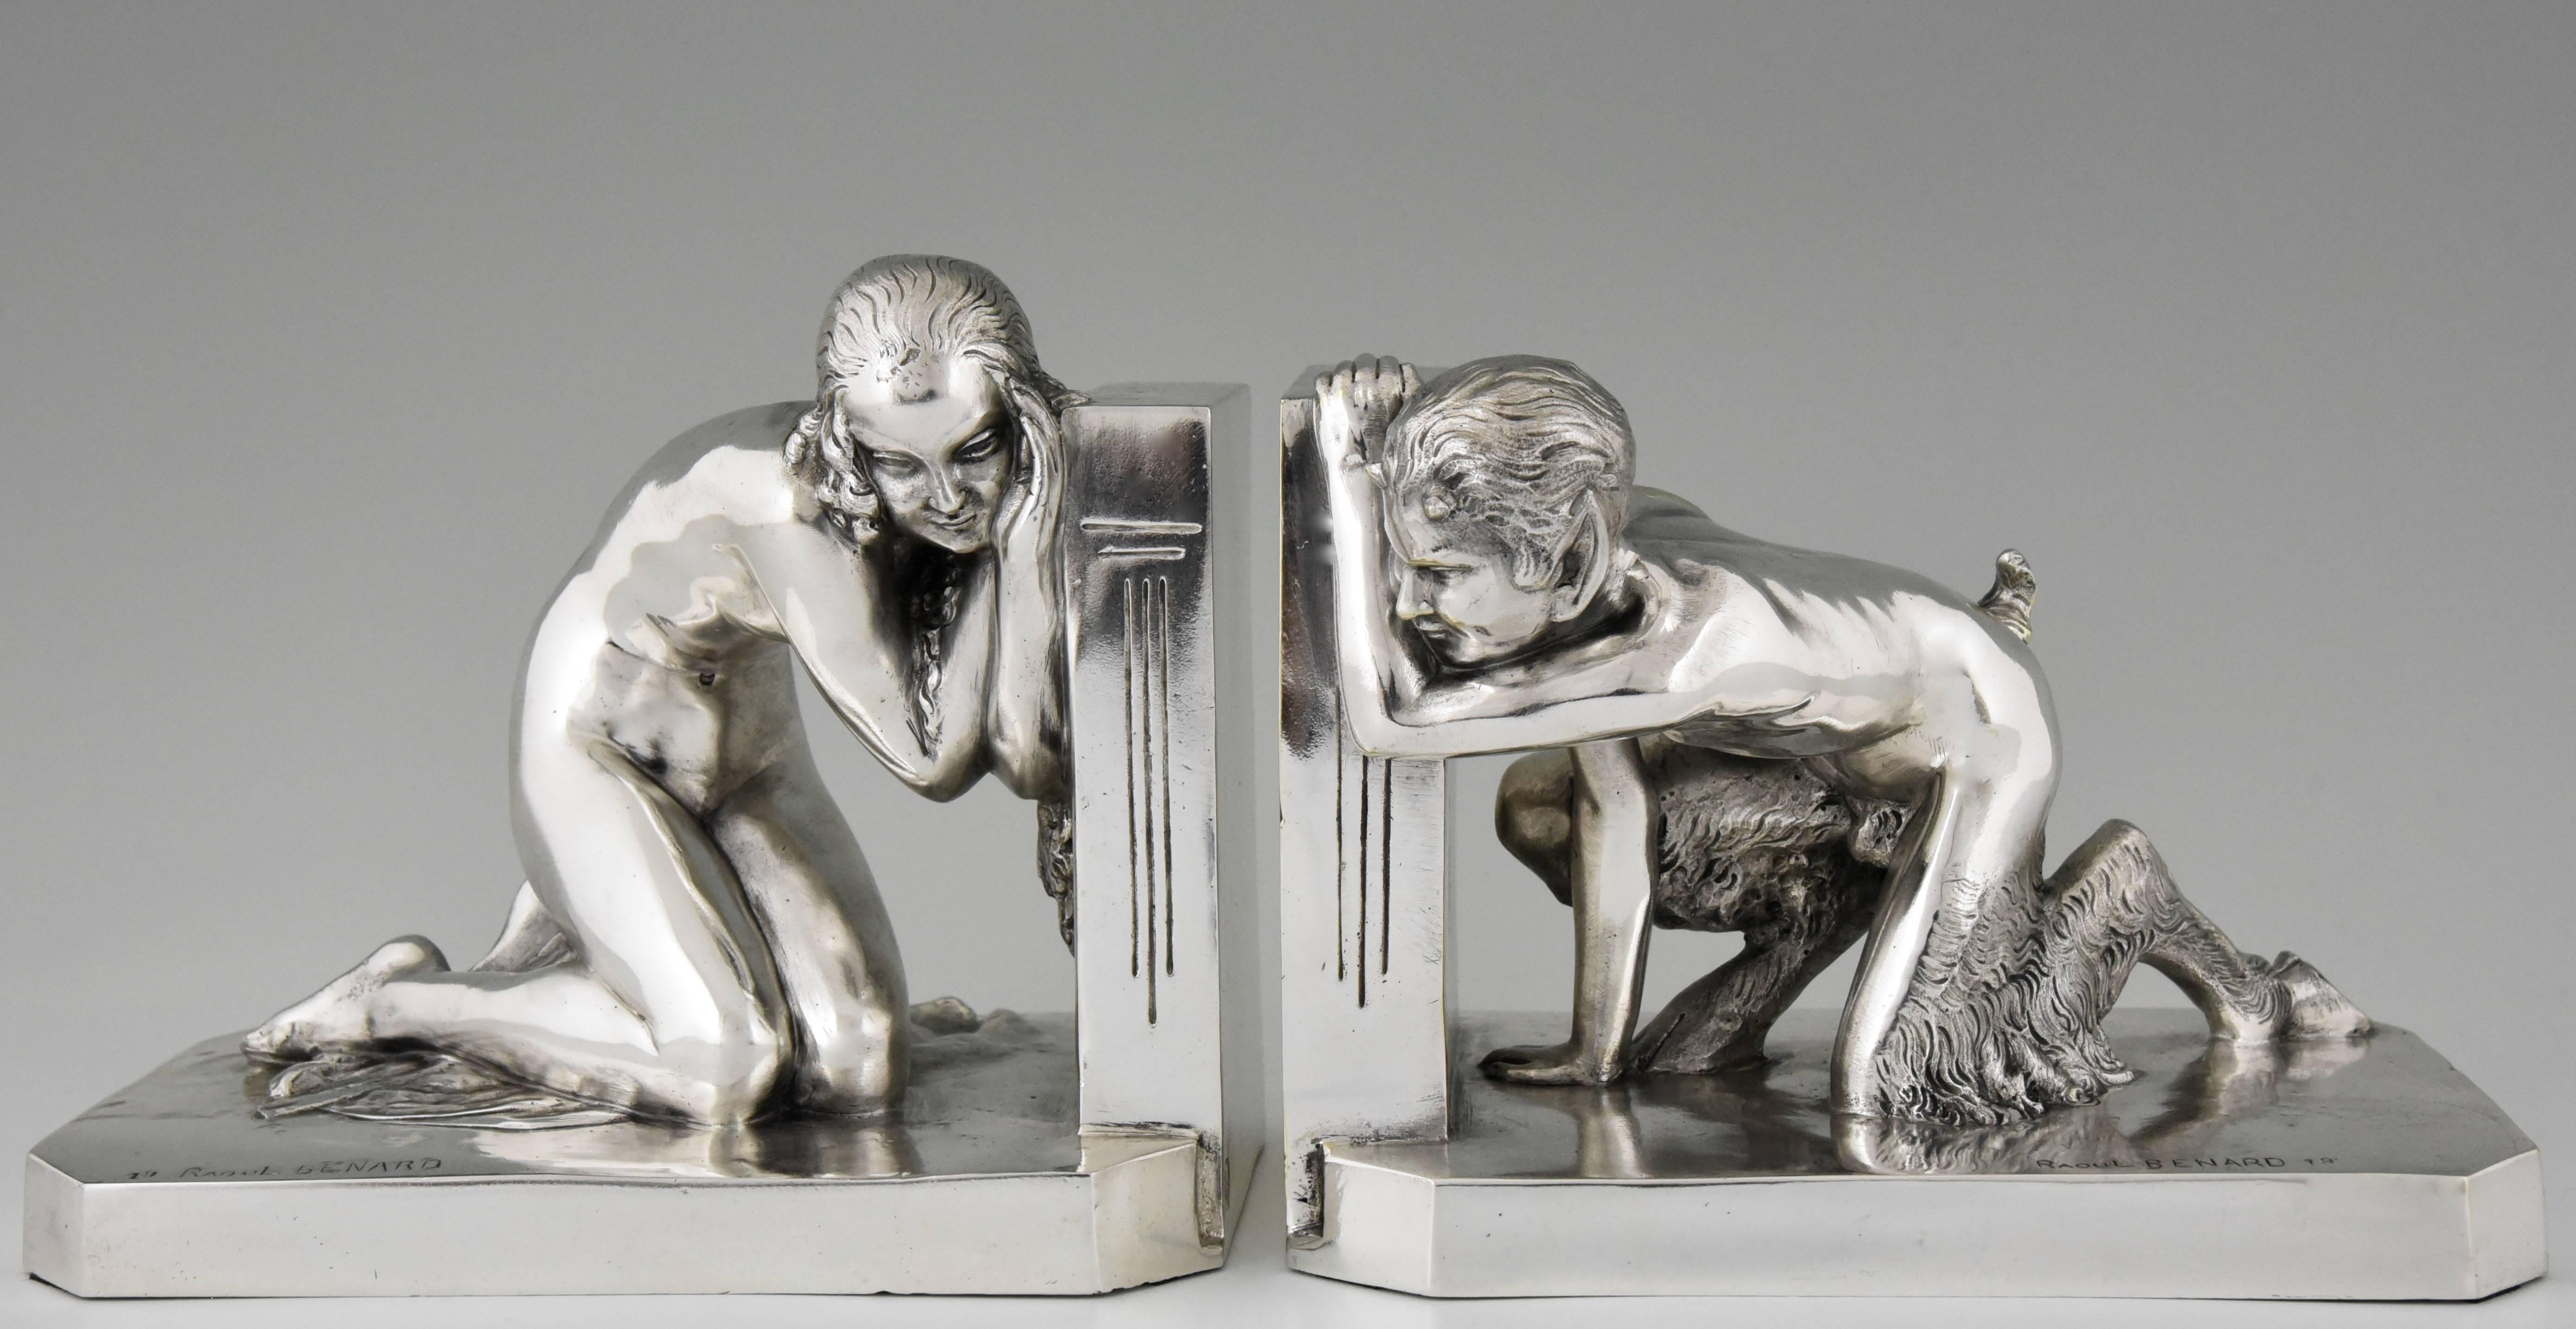 Lovely pair of silvered bronze bookends with nude and satyr playing hide and seek by Raoul Benard, signed and with the foundry mark of Les Neveux de Lehmann, Paris.
Signature/ Marks: Raoul Benard. ?Numbered. ?Foundry mark LN, Les Neveux de Lehmann,